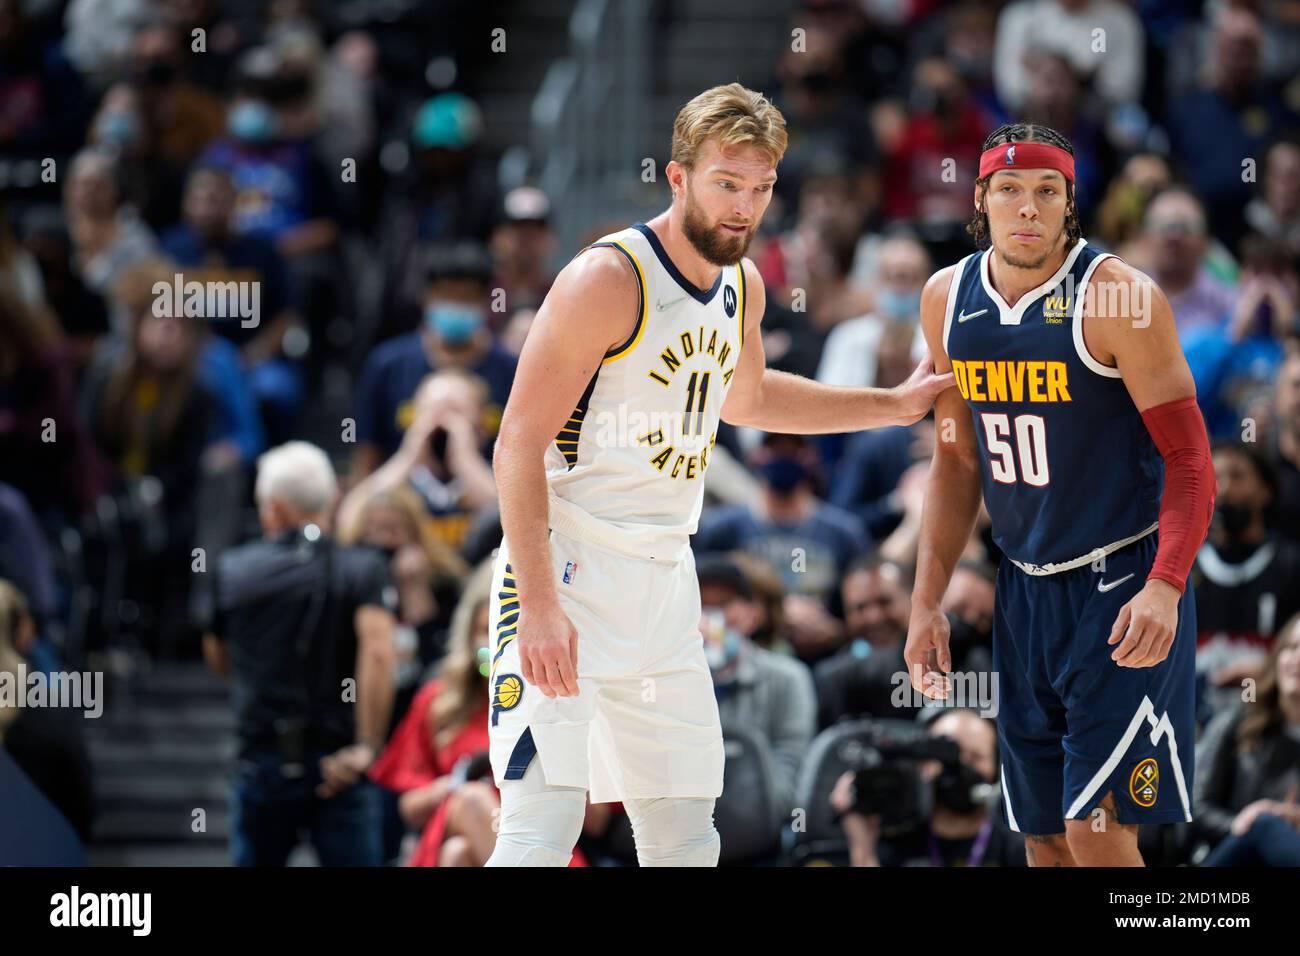 Indiana Pacers forward Domantas Sabonis (11) and Denver Nuggets forward Aaron Gordon (50) in the second half of an NBA basketball game Wednesday, Nov. 10, 2021, in Denver. The Nuggets won 100-96. (AP Photo/David Zalubowski) Stock Photo